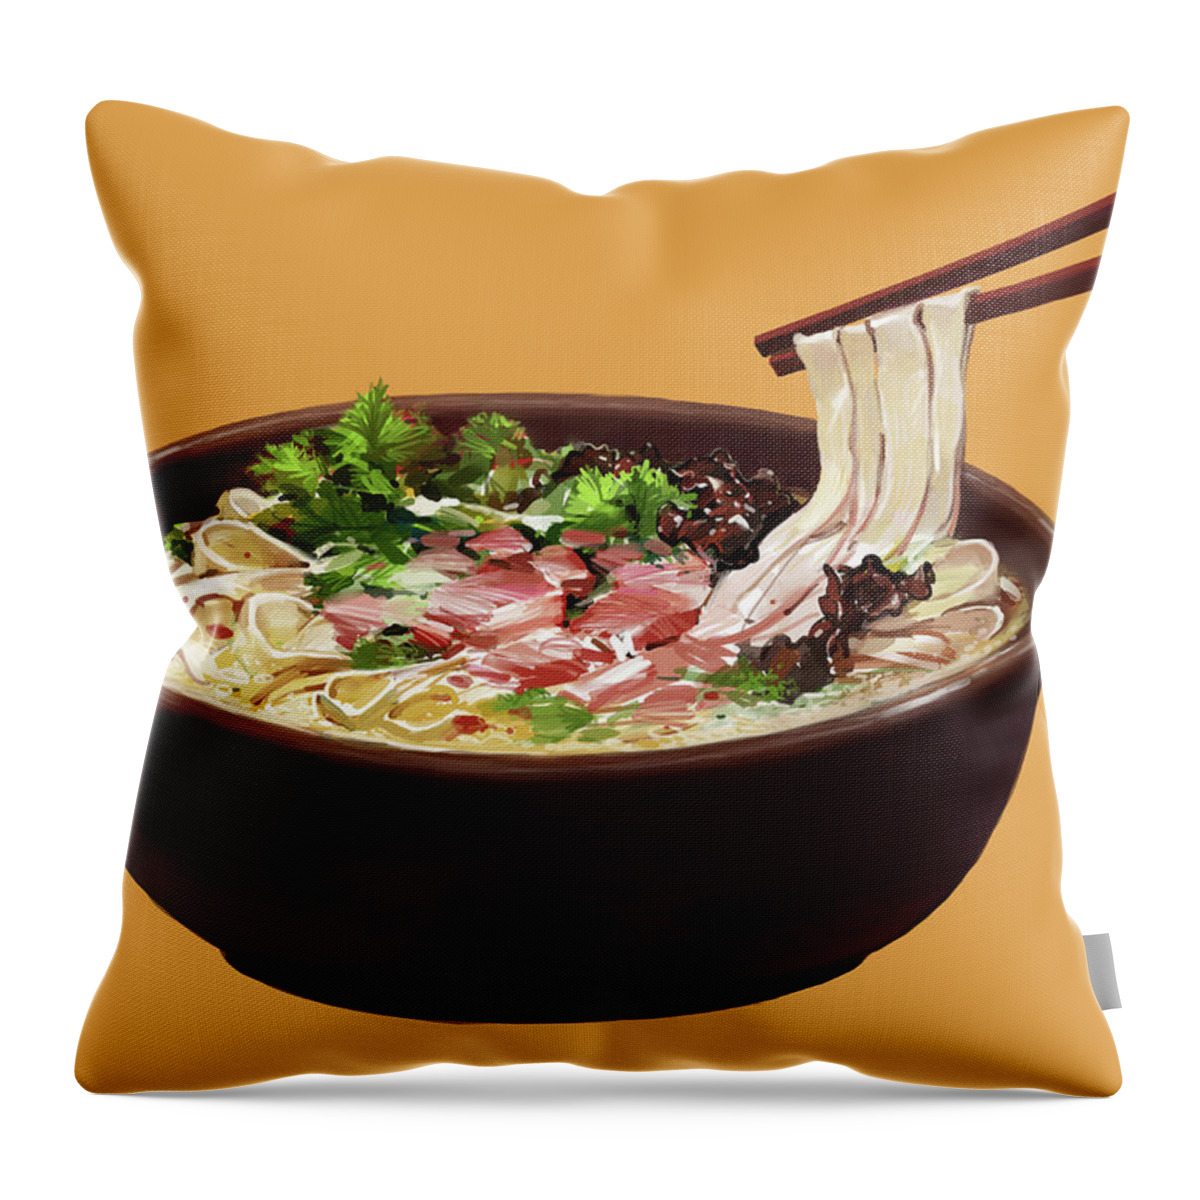 Bowl Throw Pillow featuring the photograph Chopsticks Lifting Noodles From Bowl by Ikon Ikon Images